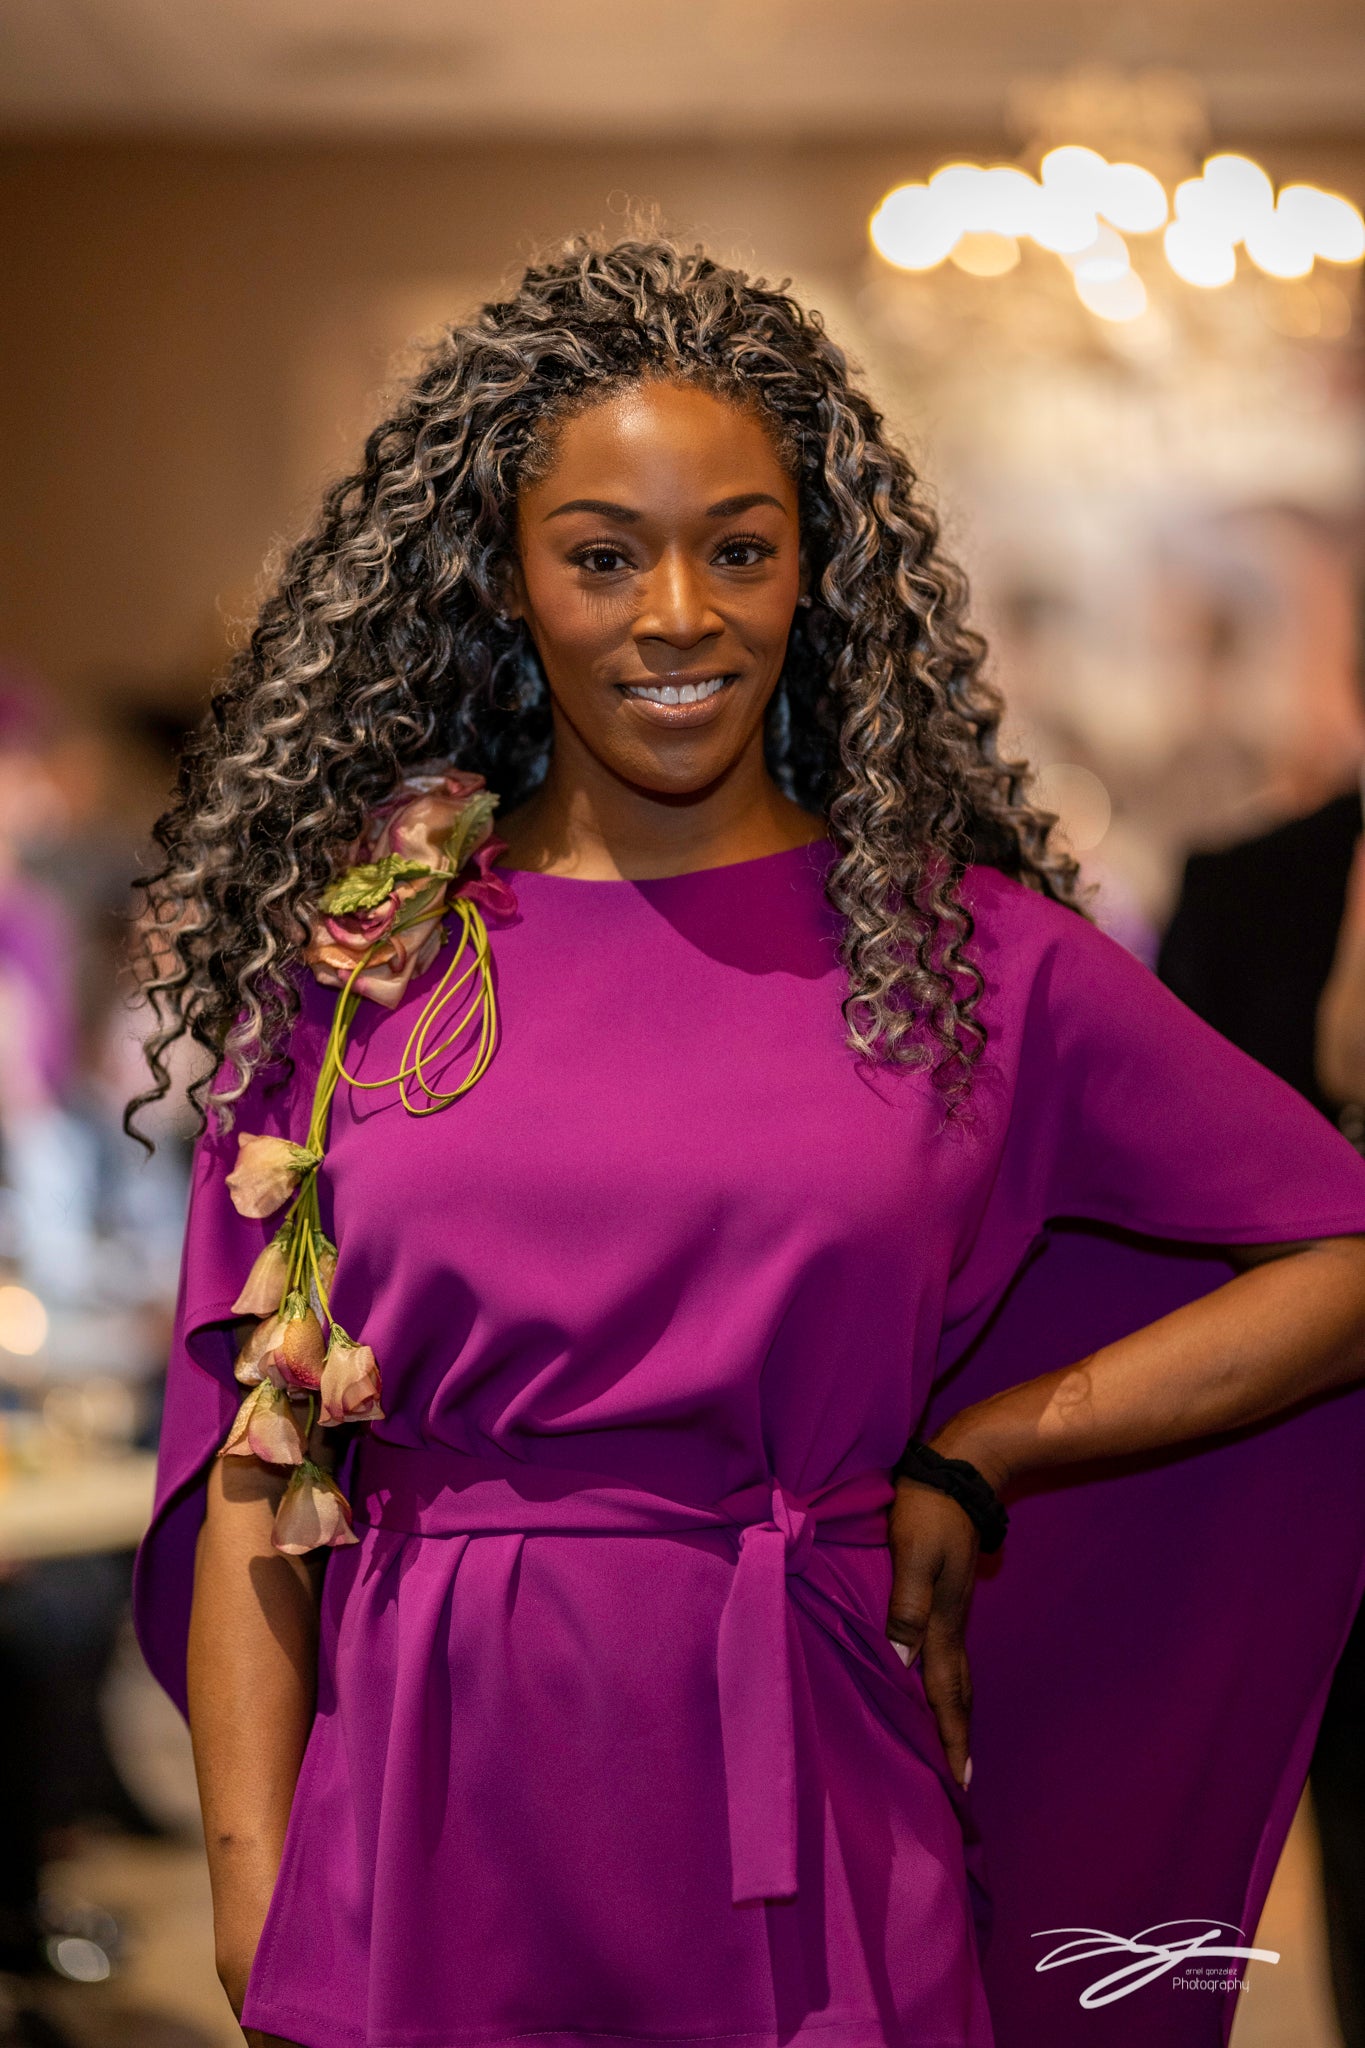 Brand Modeling Classes in Chicago at Art & Style Academy by Alesia Chaika fashion designer